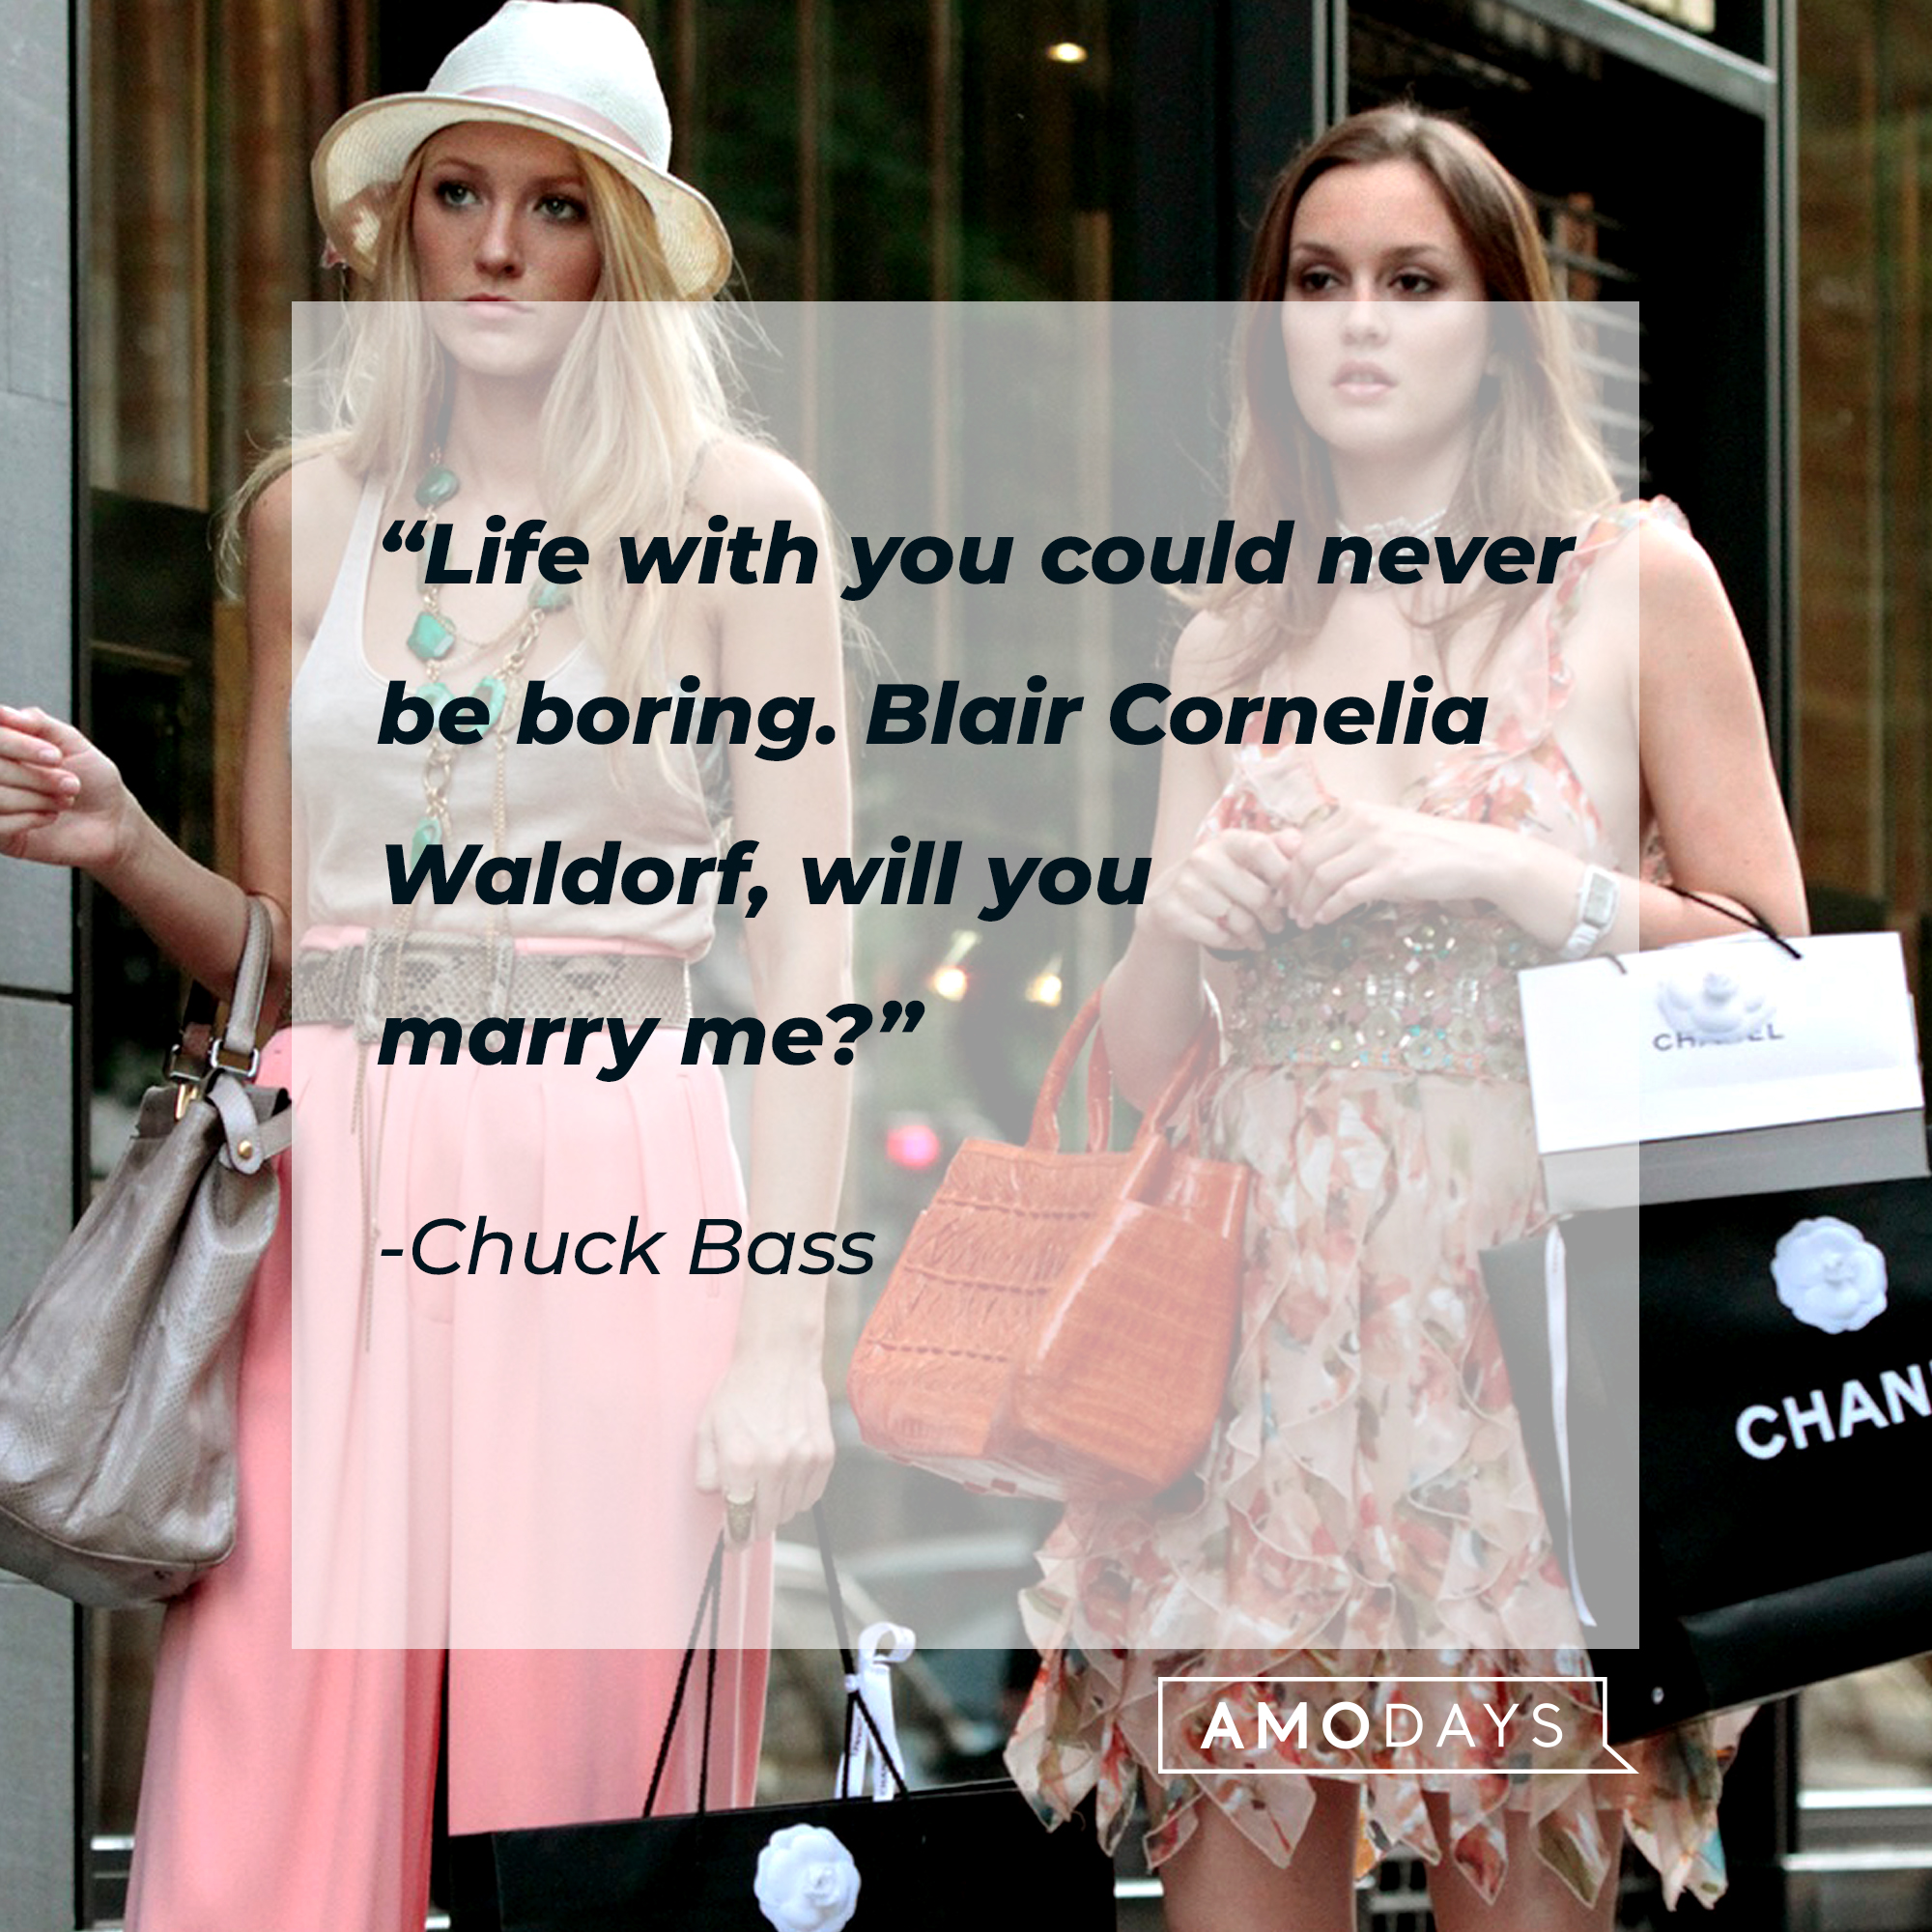 Characters from "Gossip Girl" with Chuck Bass's quote: ““Life with you could never be boring. Blair Cornelia Waldorf, will you marry me?” | Source: Facebook.com/GossipGirl